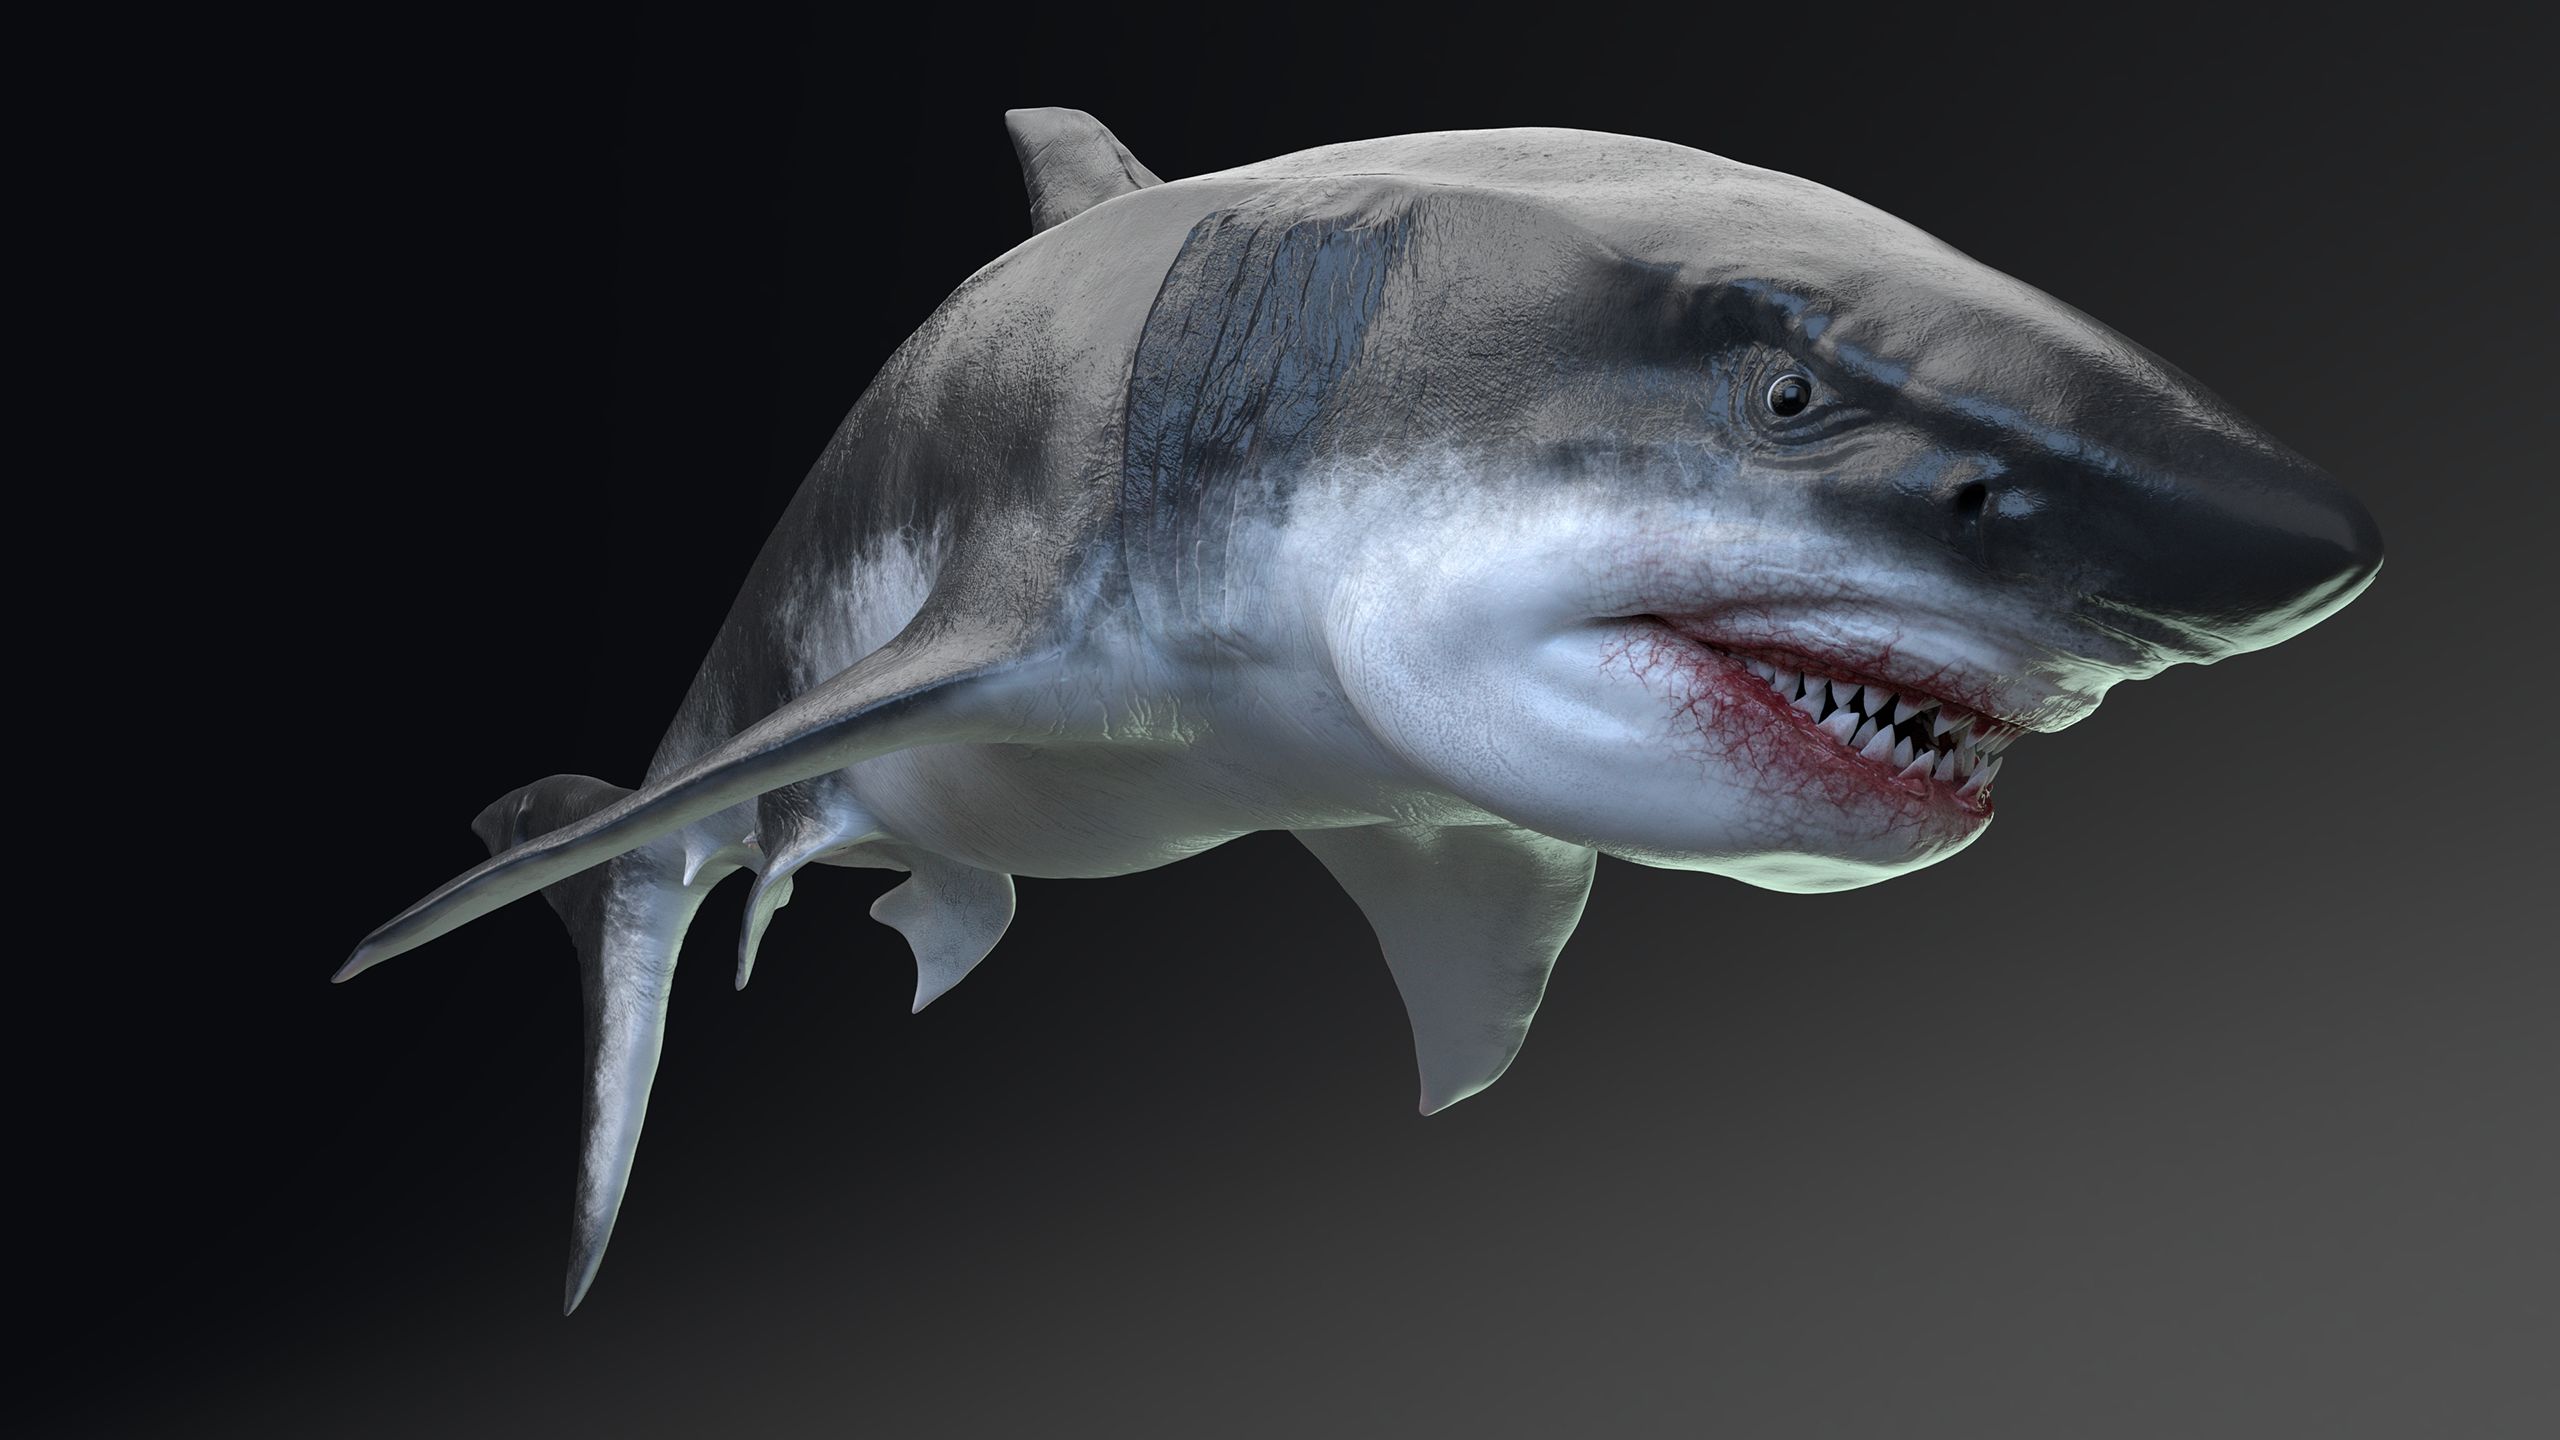 Megalodon Render. Credit: iStock / Getty Images Plus